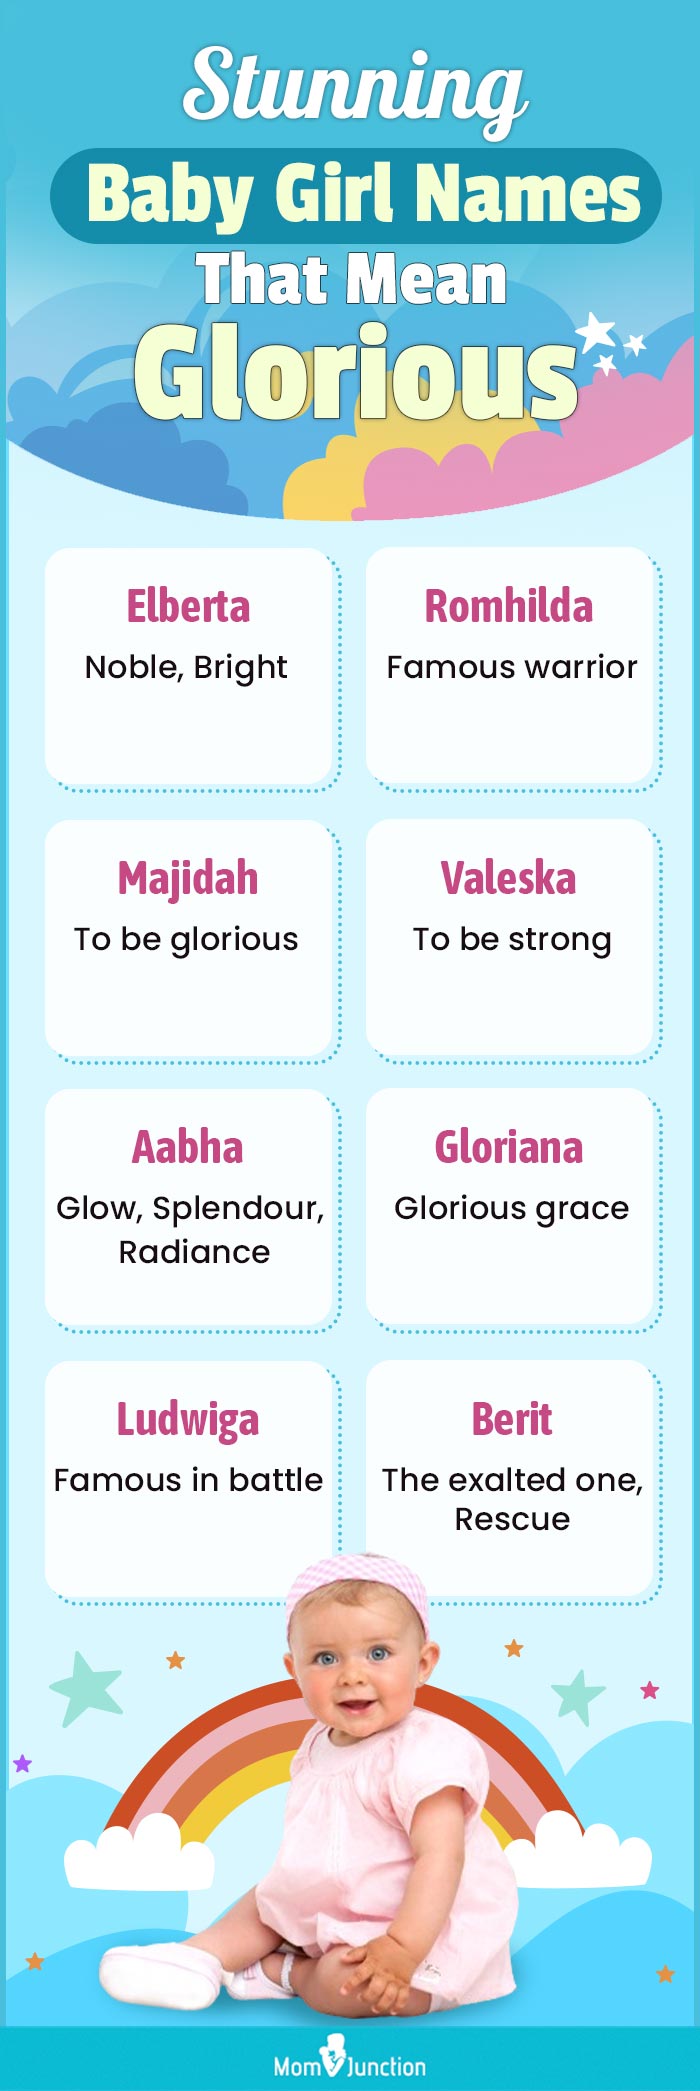 stunning baby girl names that mean glorious (infographic)